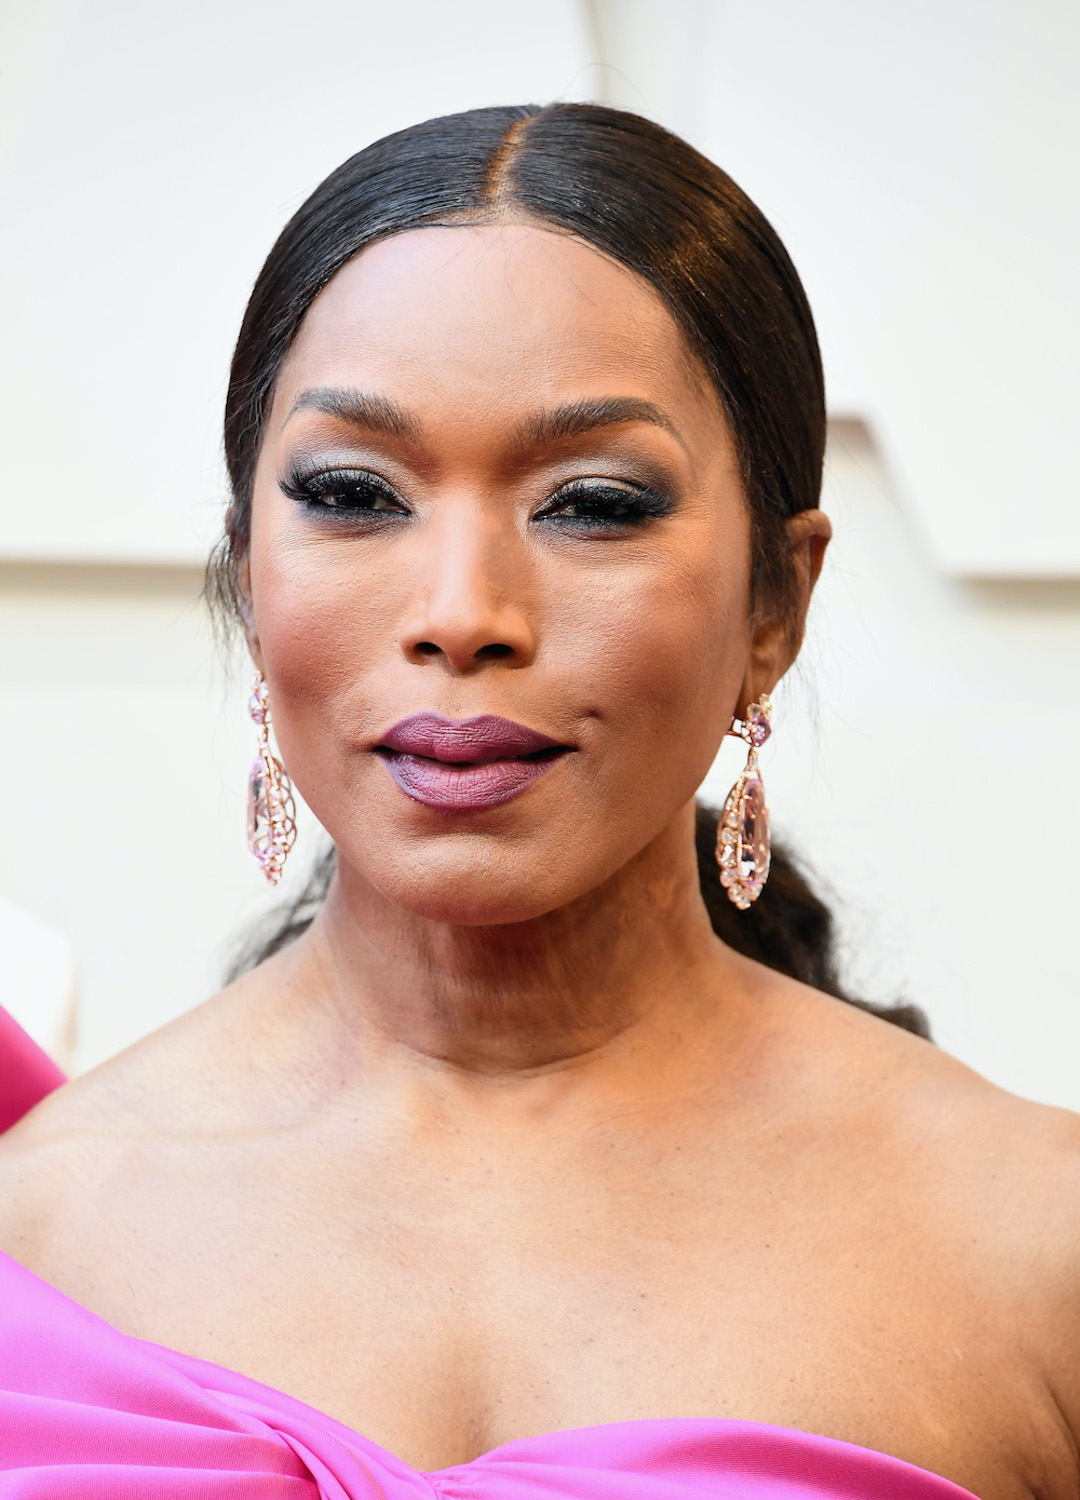 Angela Bassett attends the 91st Annual Academy Awards at Hollywood and Highland on February 24, 2019 in Hollywood, California